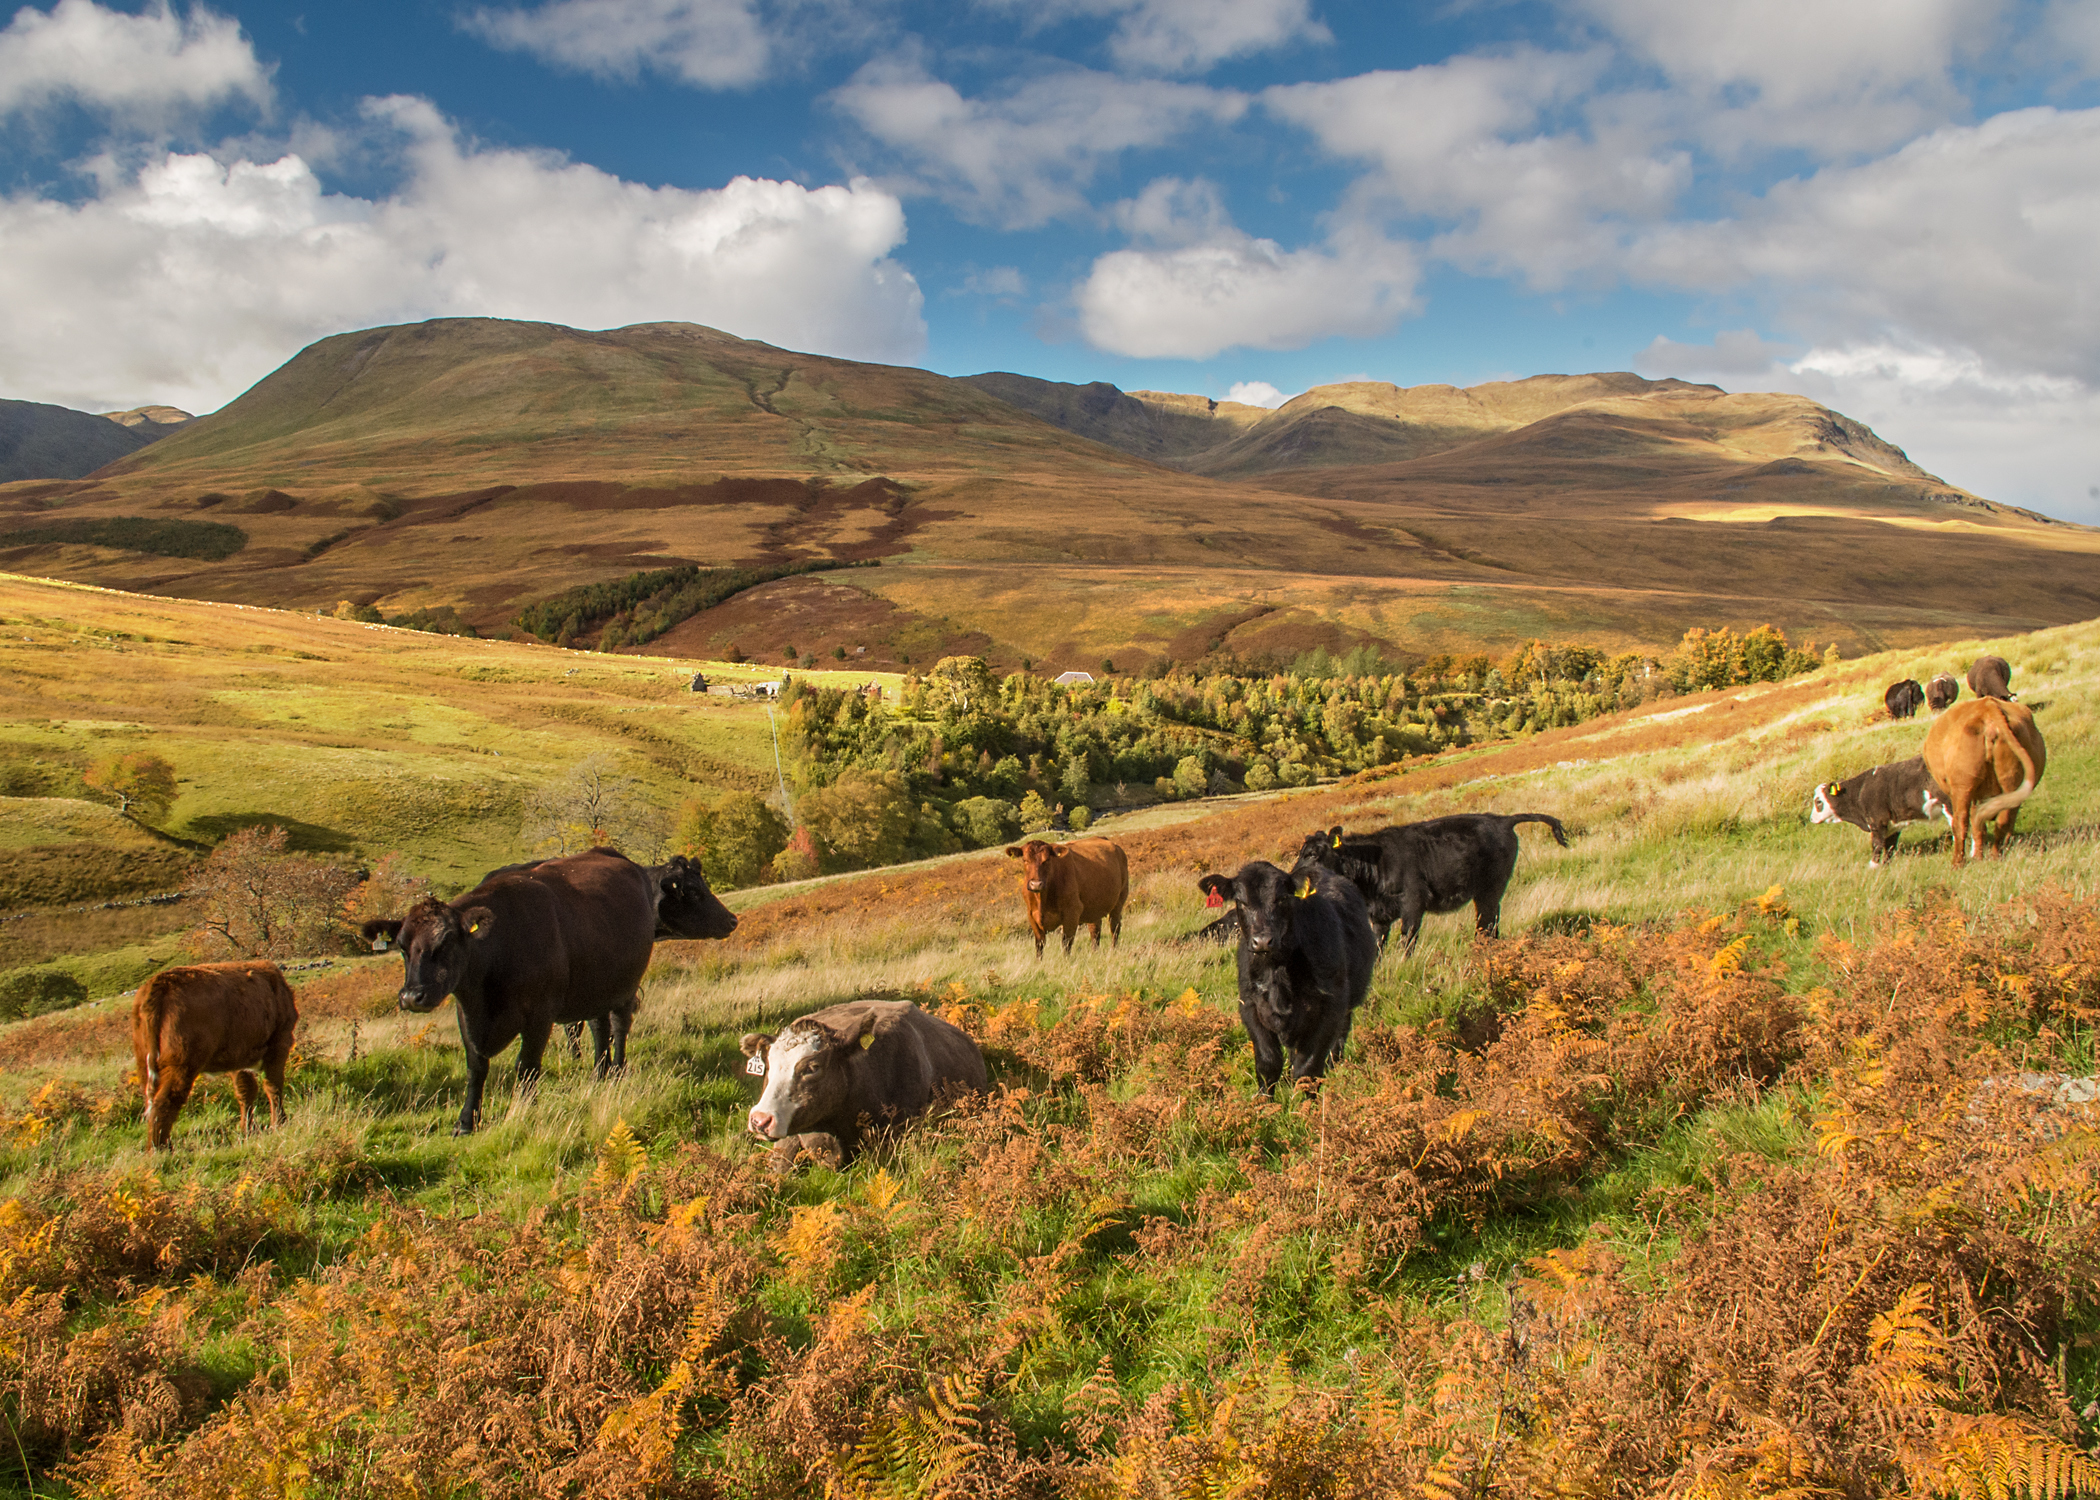 You cant get much greener and tastier than beef produced from Scotlands hills say industry leaders in response to the Stirling Uni student ban on meat and dairy products in its outlets